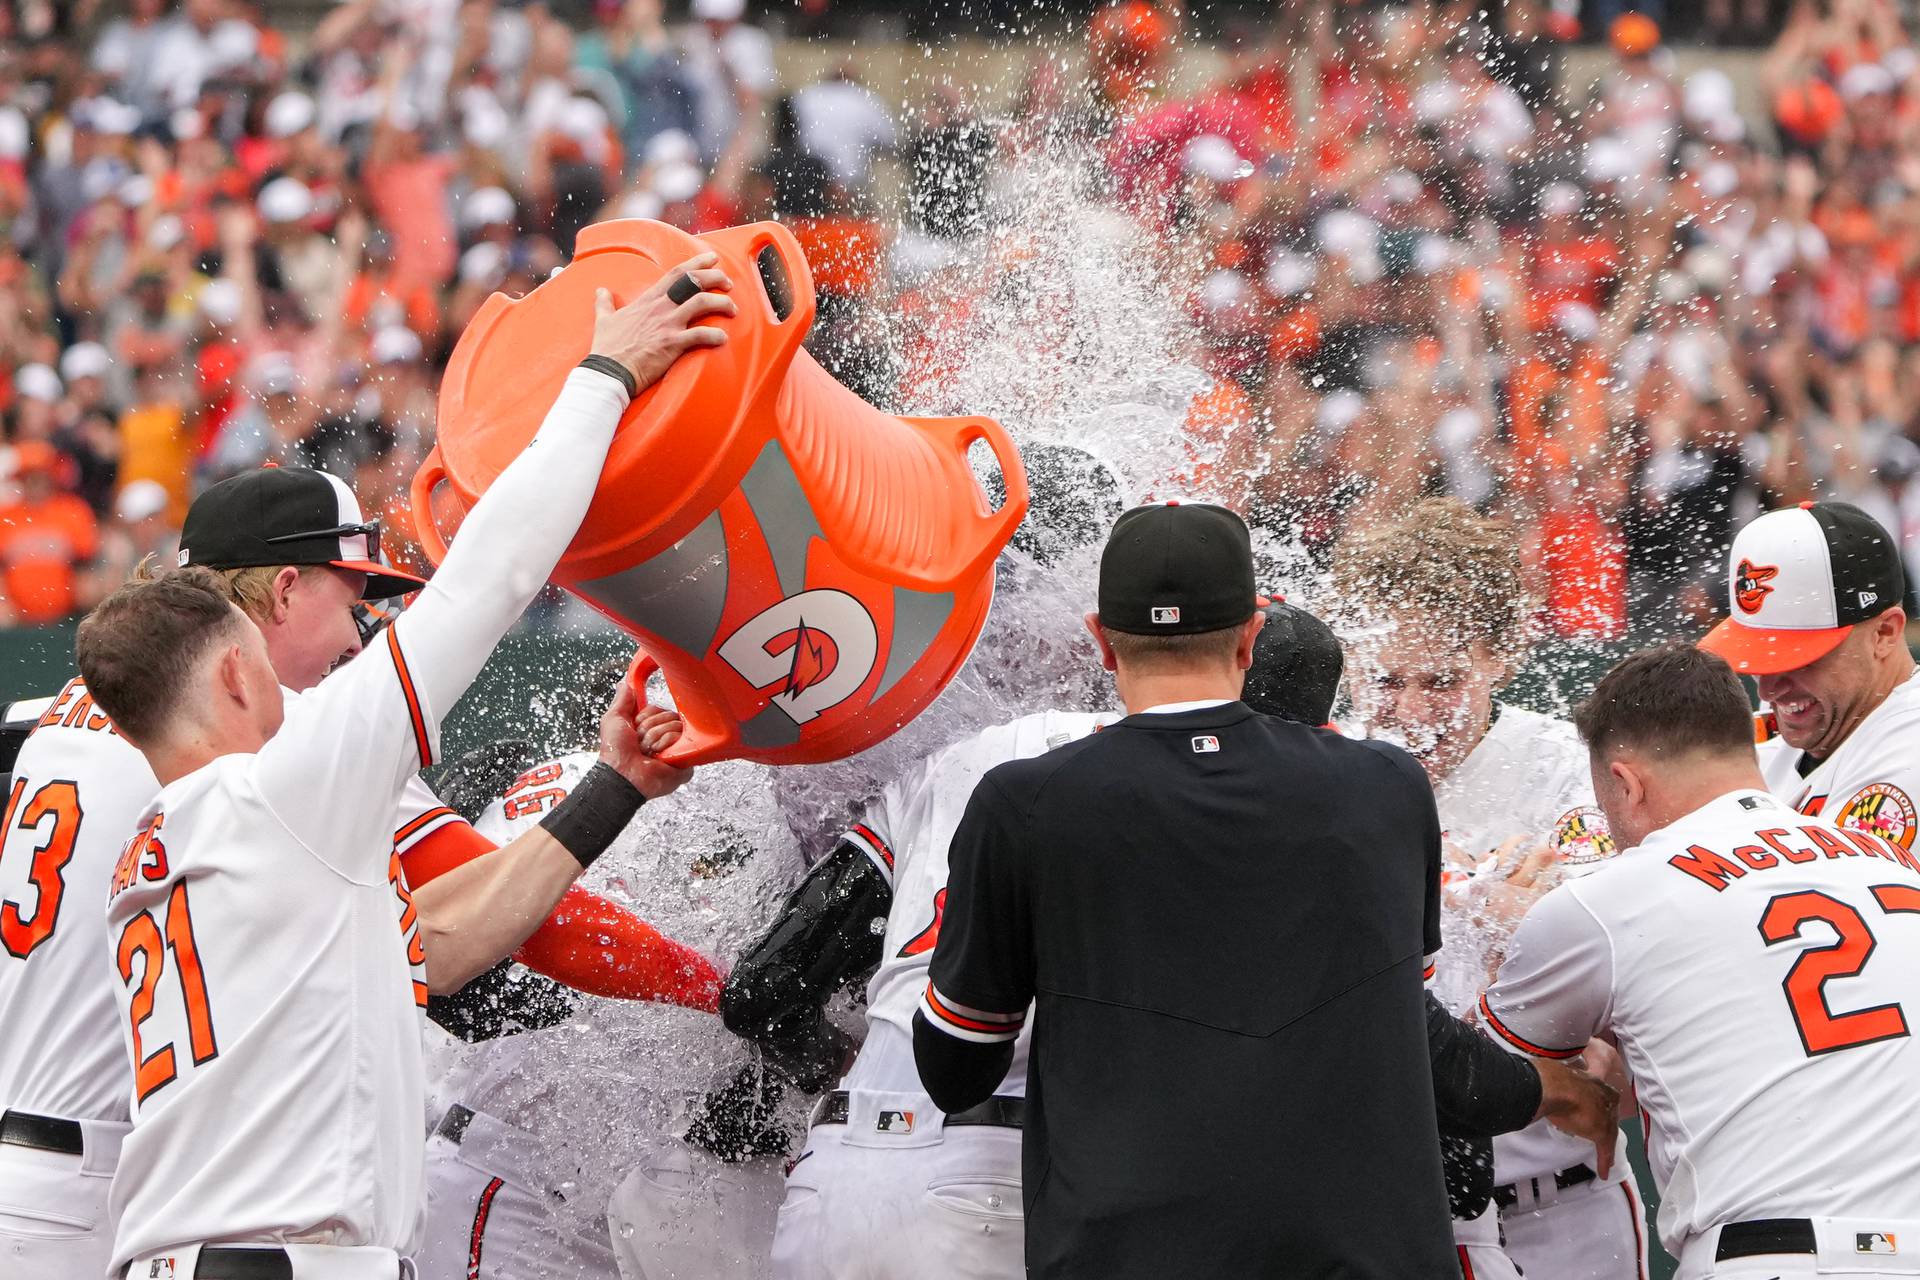 Baltimore Orioles left fielder Austin Hays (21) dumps gatorade on center fielder Cedric Mullins after he hit a sacrifice fly in the eleventh inning to win the game against the Tampa Bay Rays on Sunday, September 17, 2023. The Baltimore Orioles clinched a spot in the postseason for the first time since 2016.